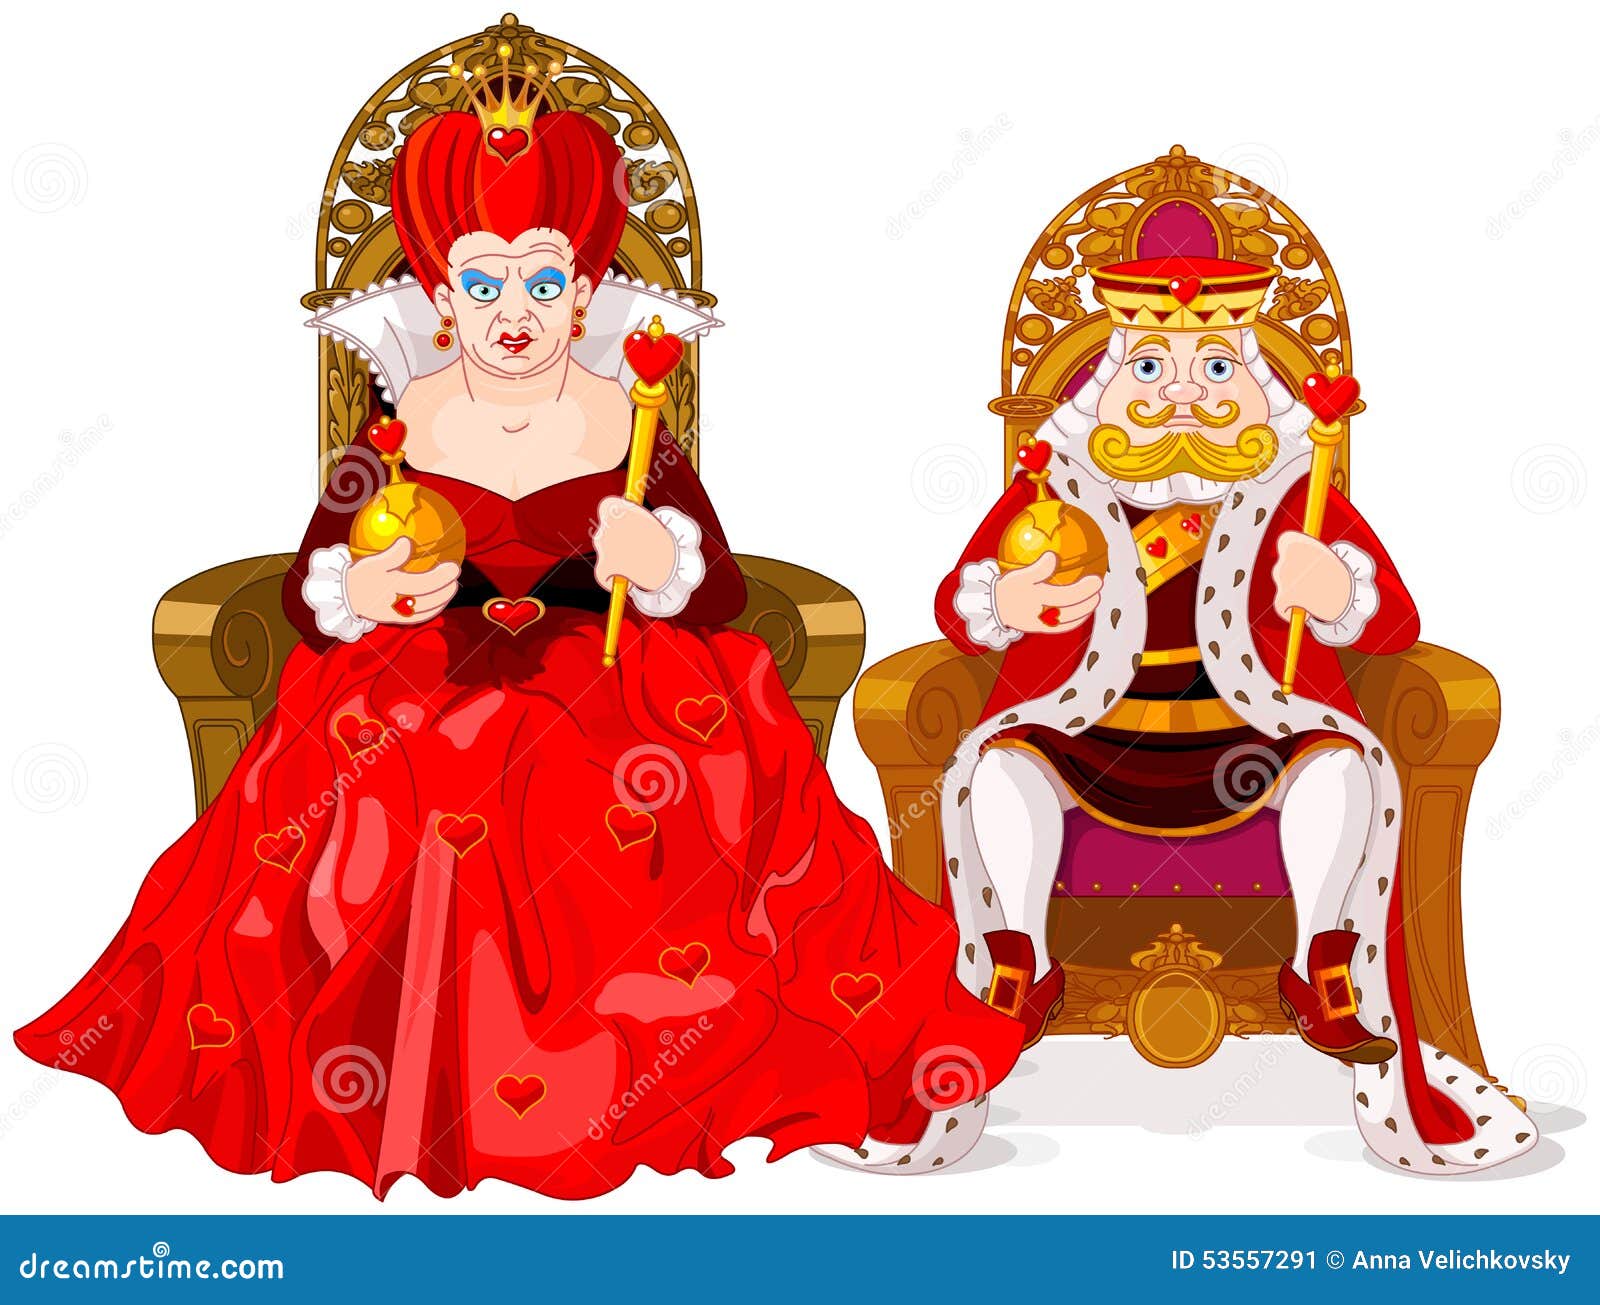 clipart of king and queen - photo #46